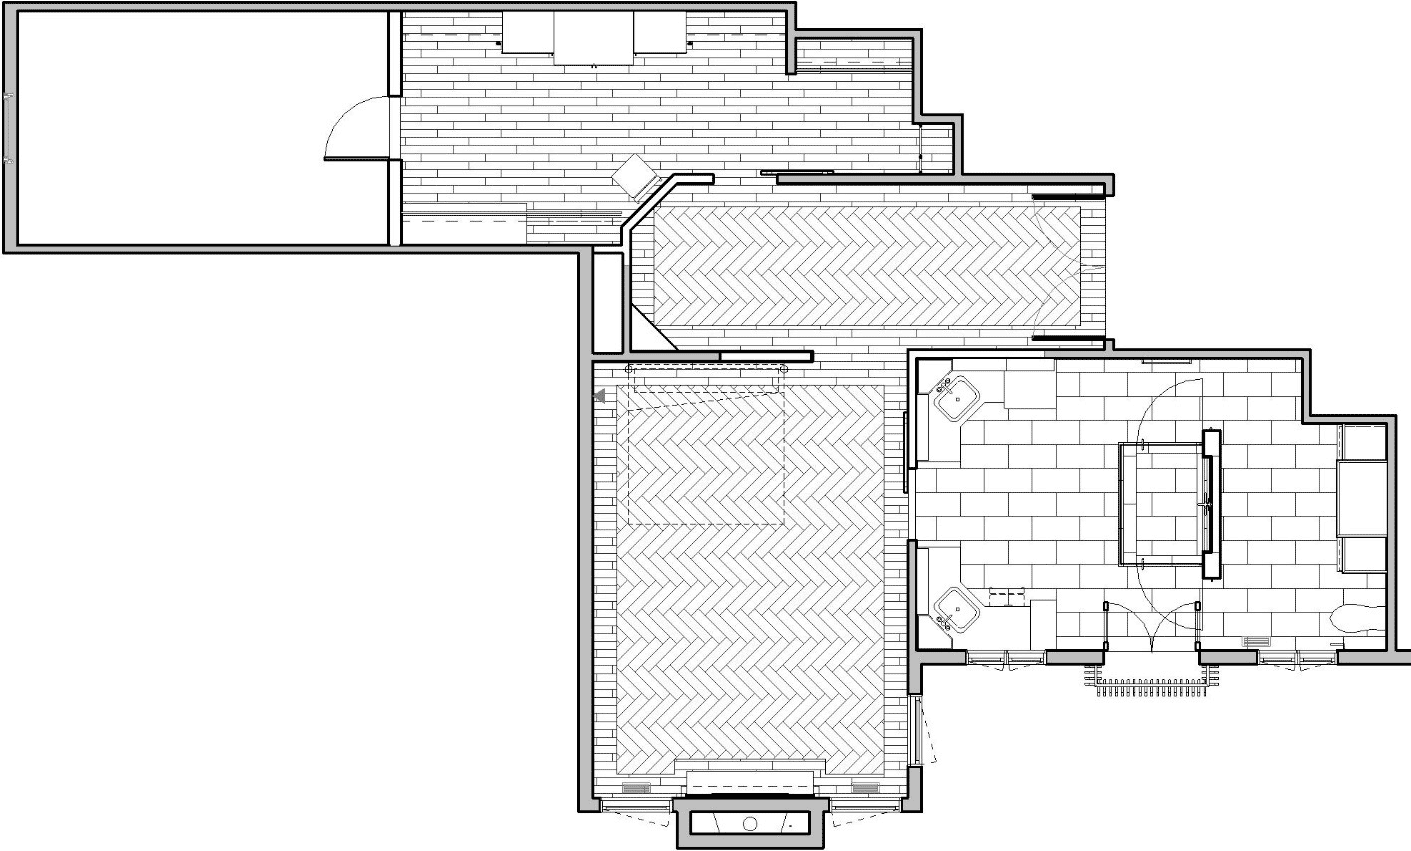 new floor plan for master suite being remodeled by Silent Rivers of Des Moines organizes the bathroom around a 3-sided shower with a bedroom layout more defined around fireplace